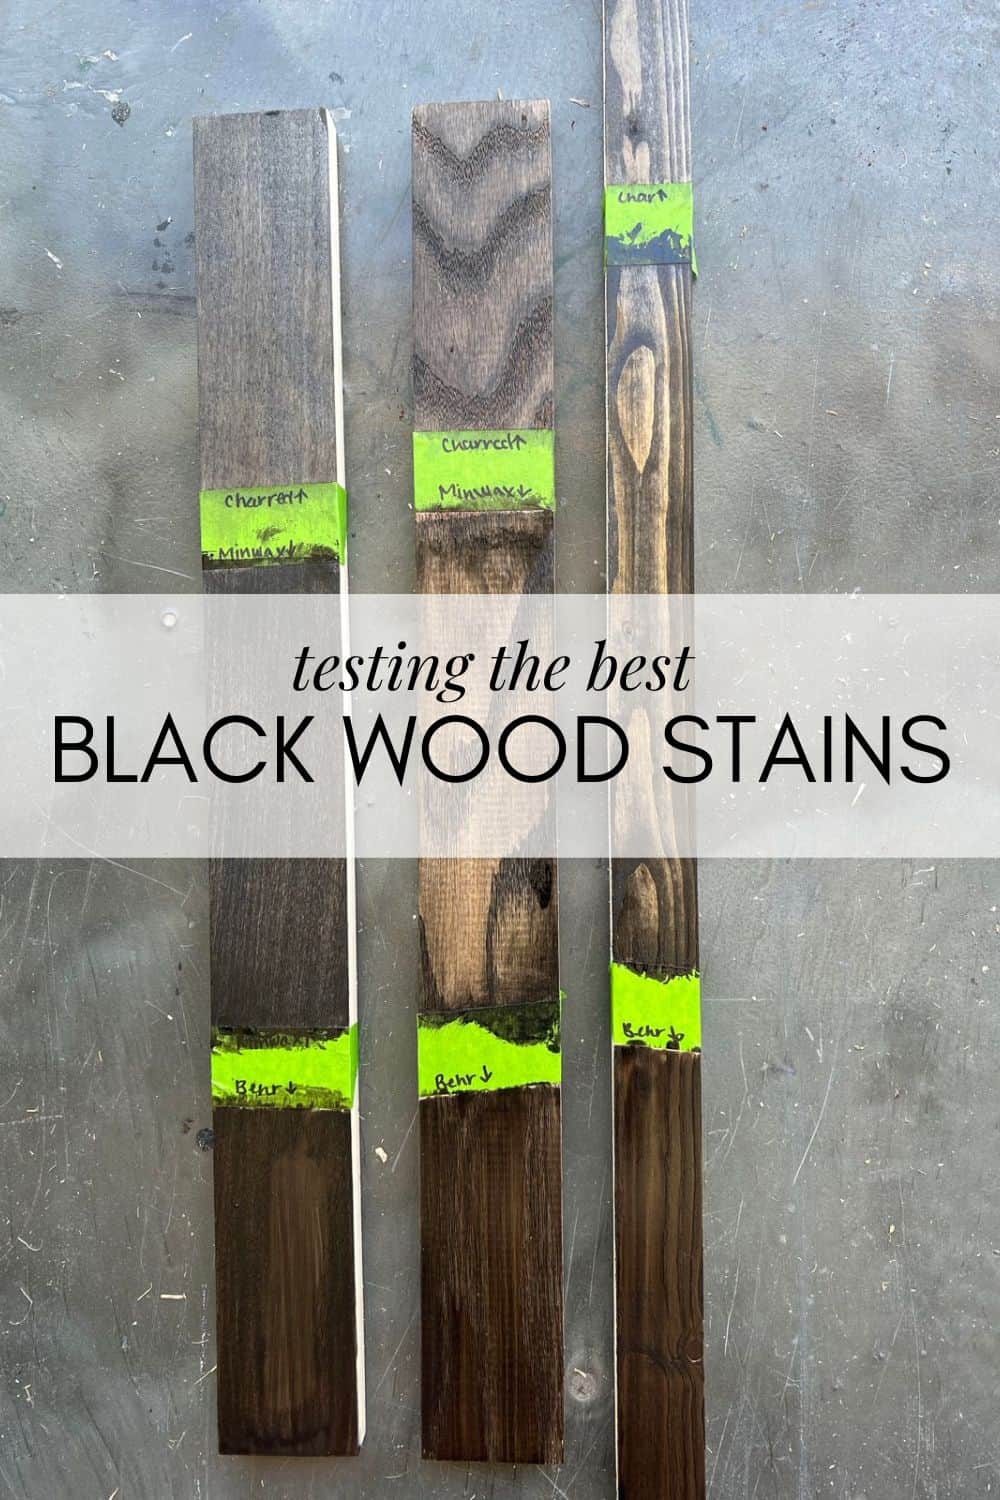 I Tested 4 Black Wood Stains (So You Don’t Have To)